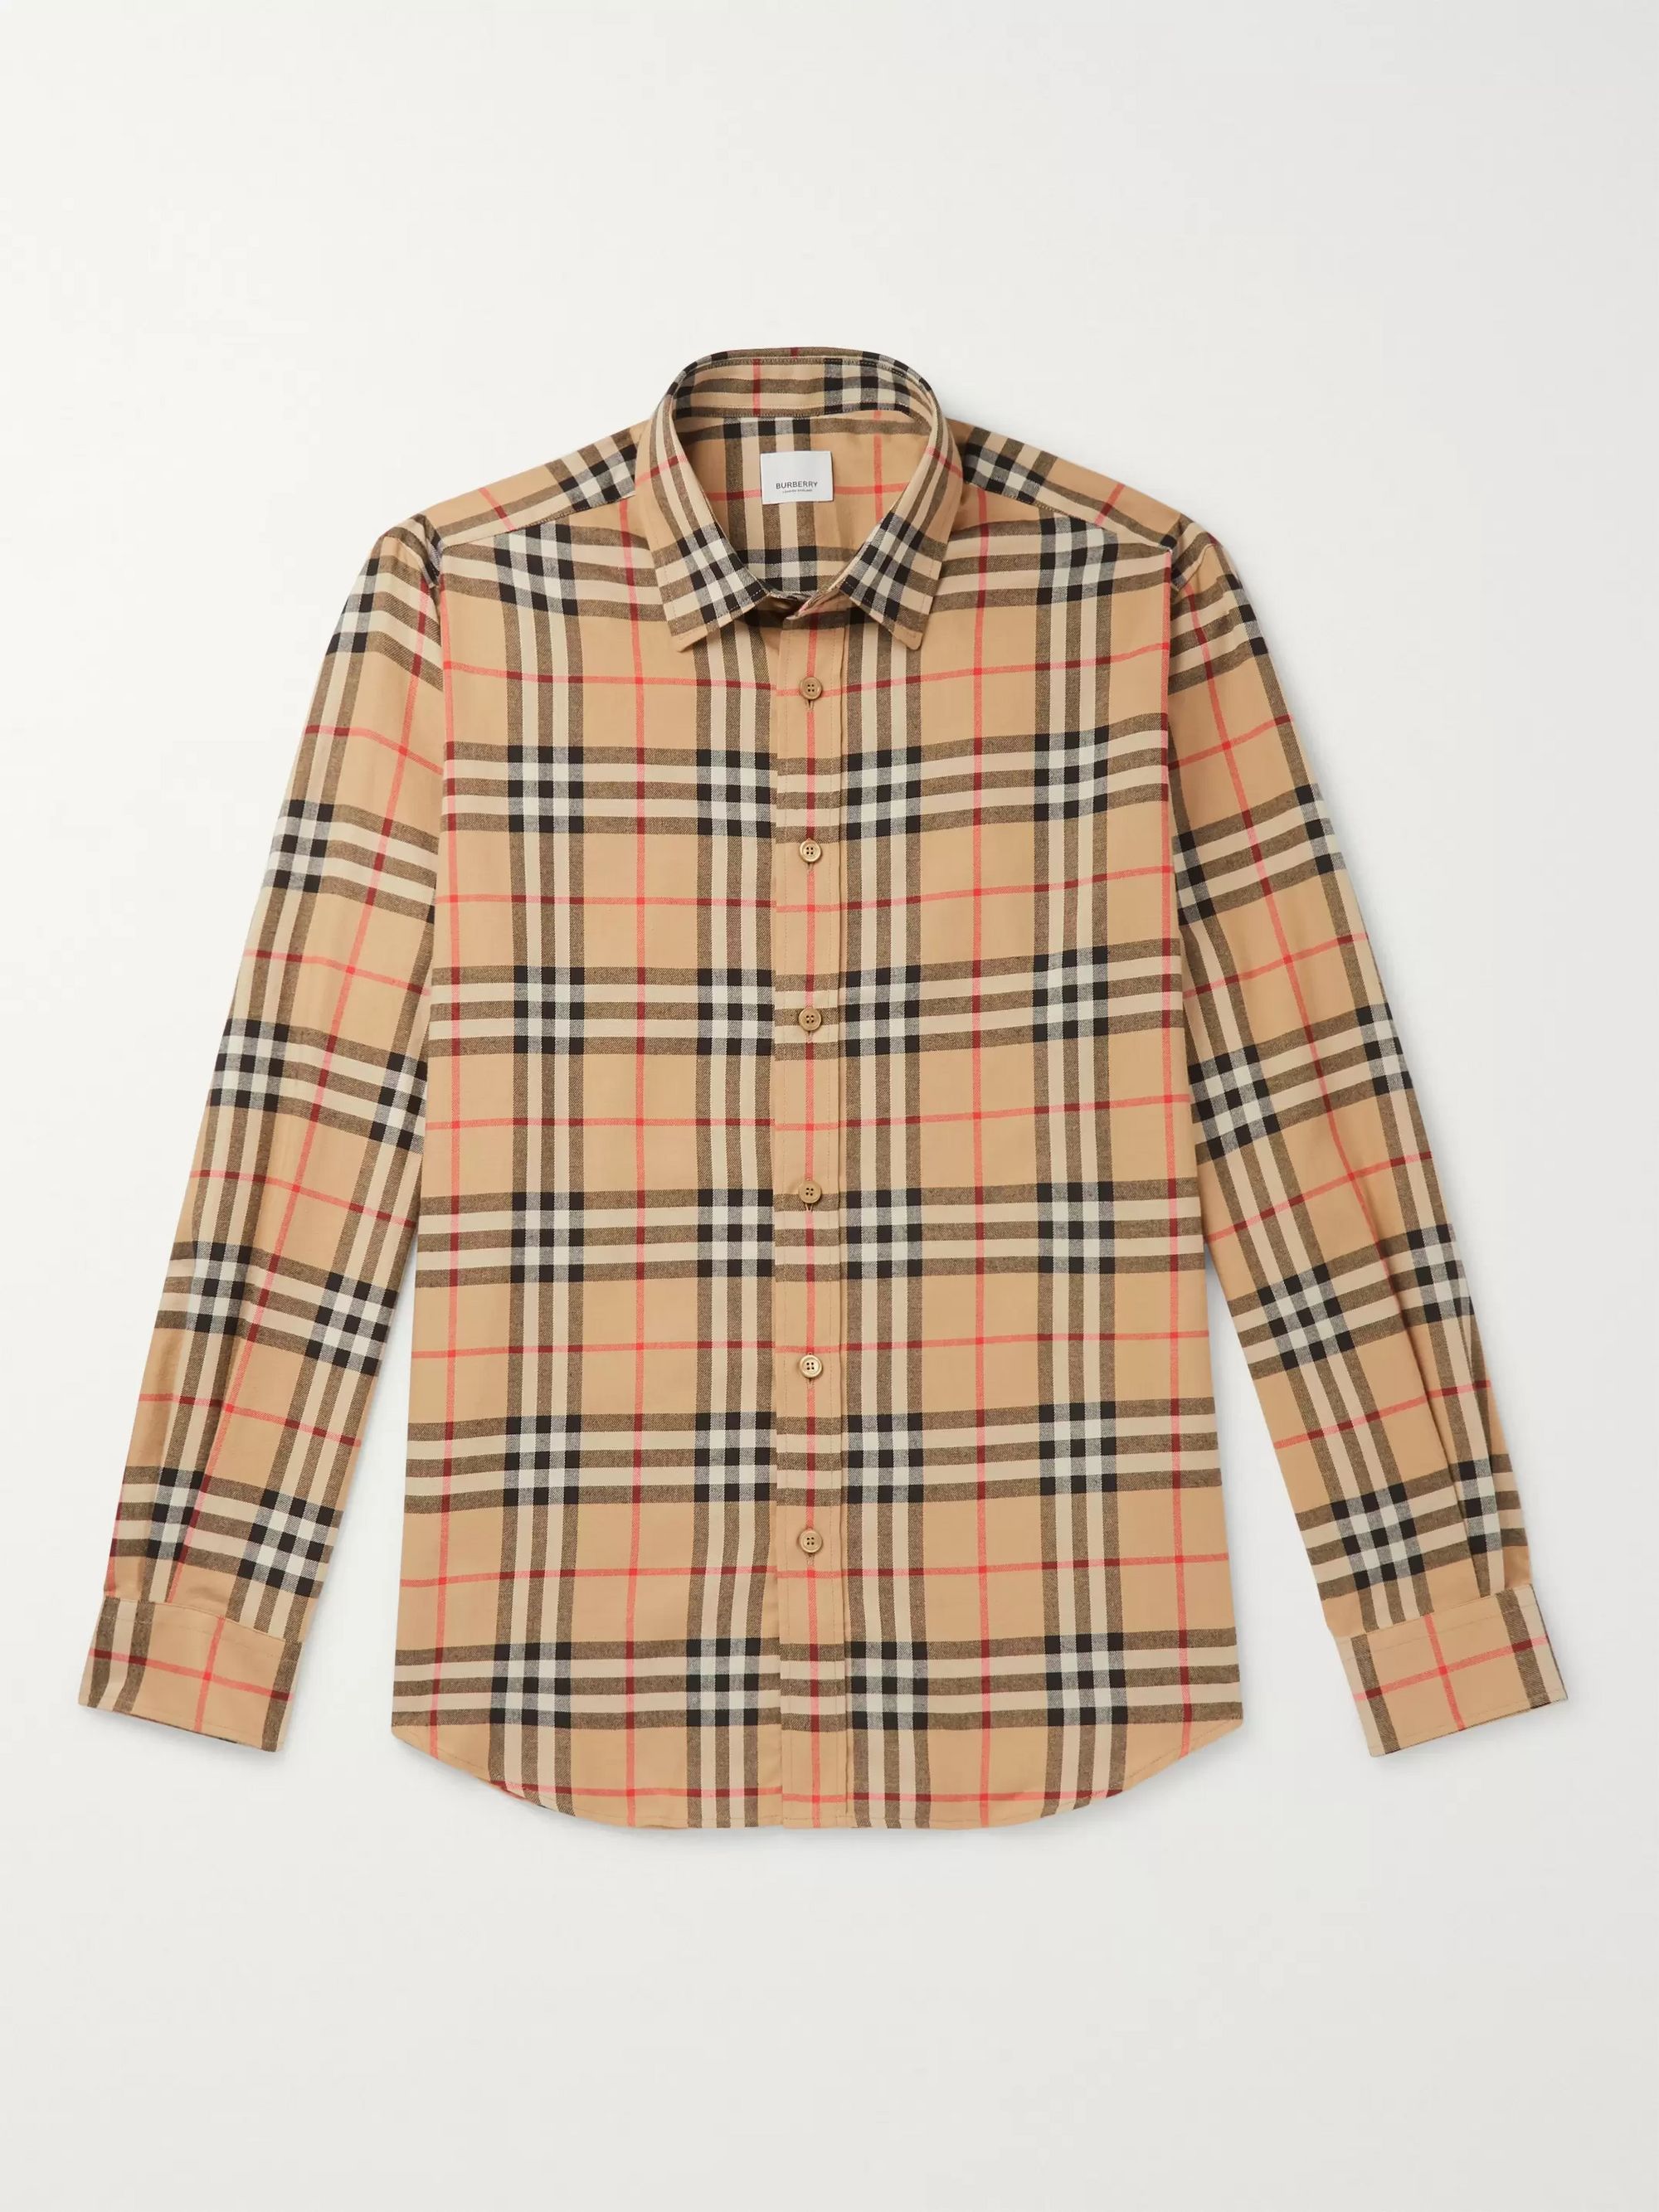 flannels burberry